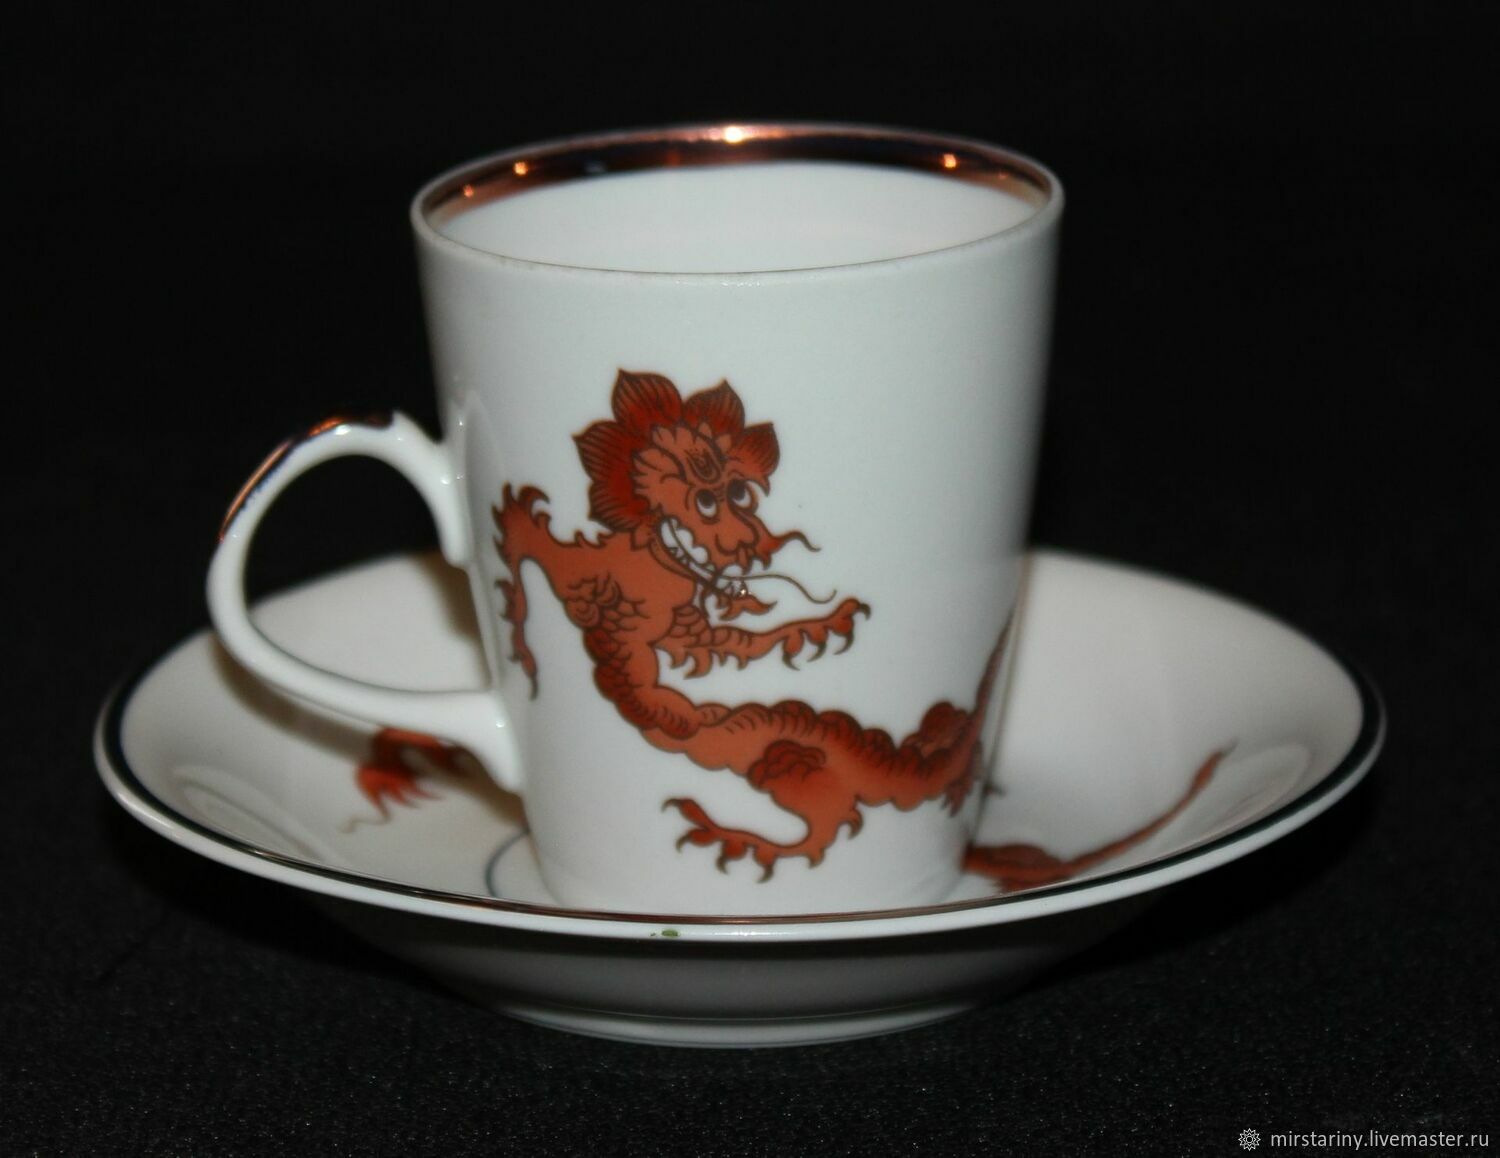 Coffee couple decor 'Red Dragon', Lichte, Germany, Vintage kitchen utensils, Moscow,  Фото №1